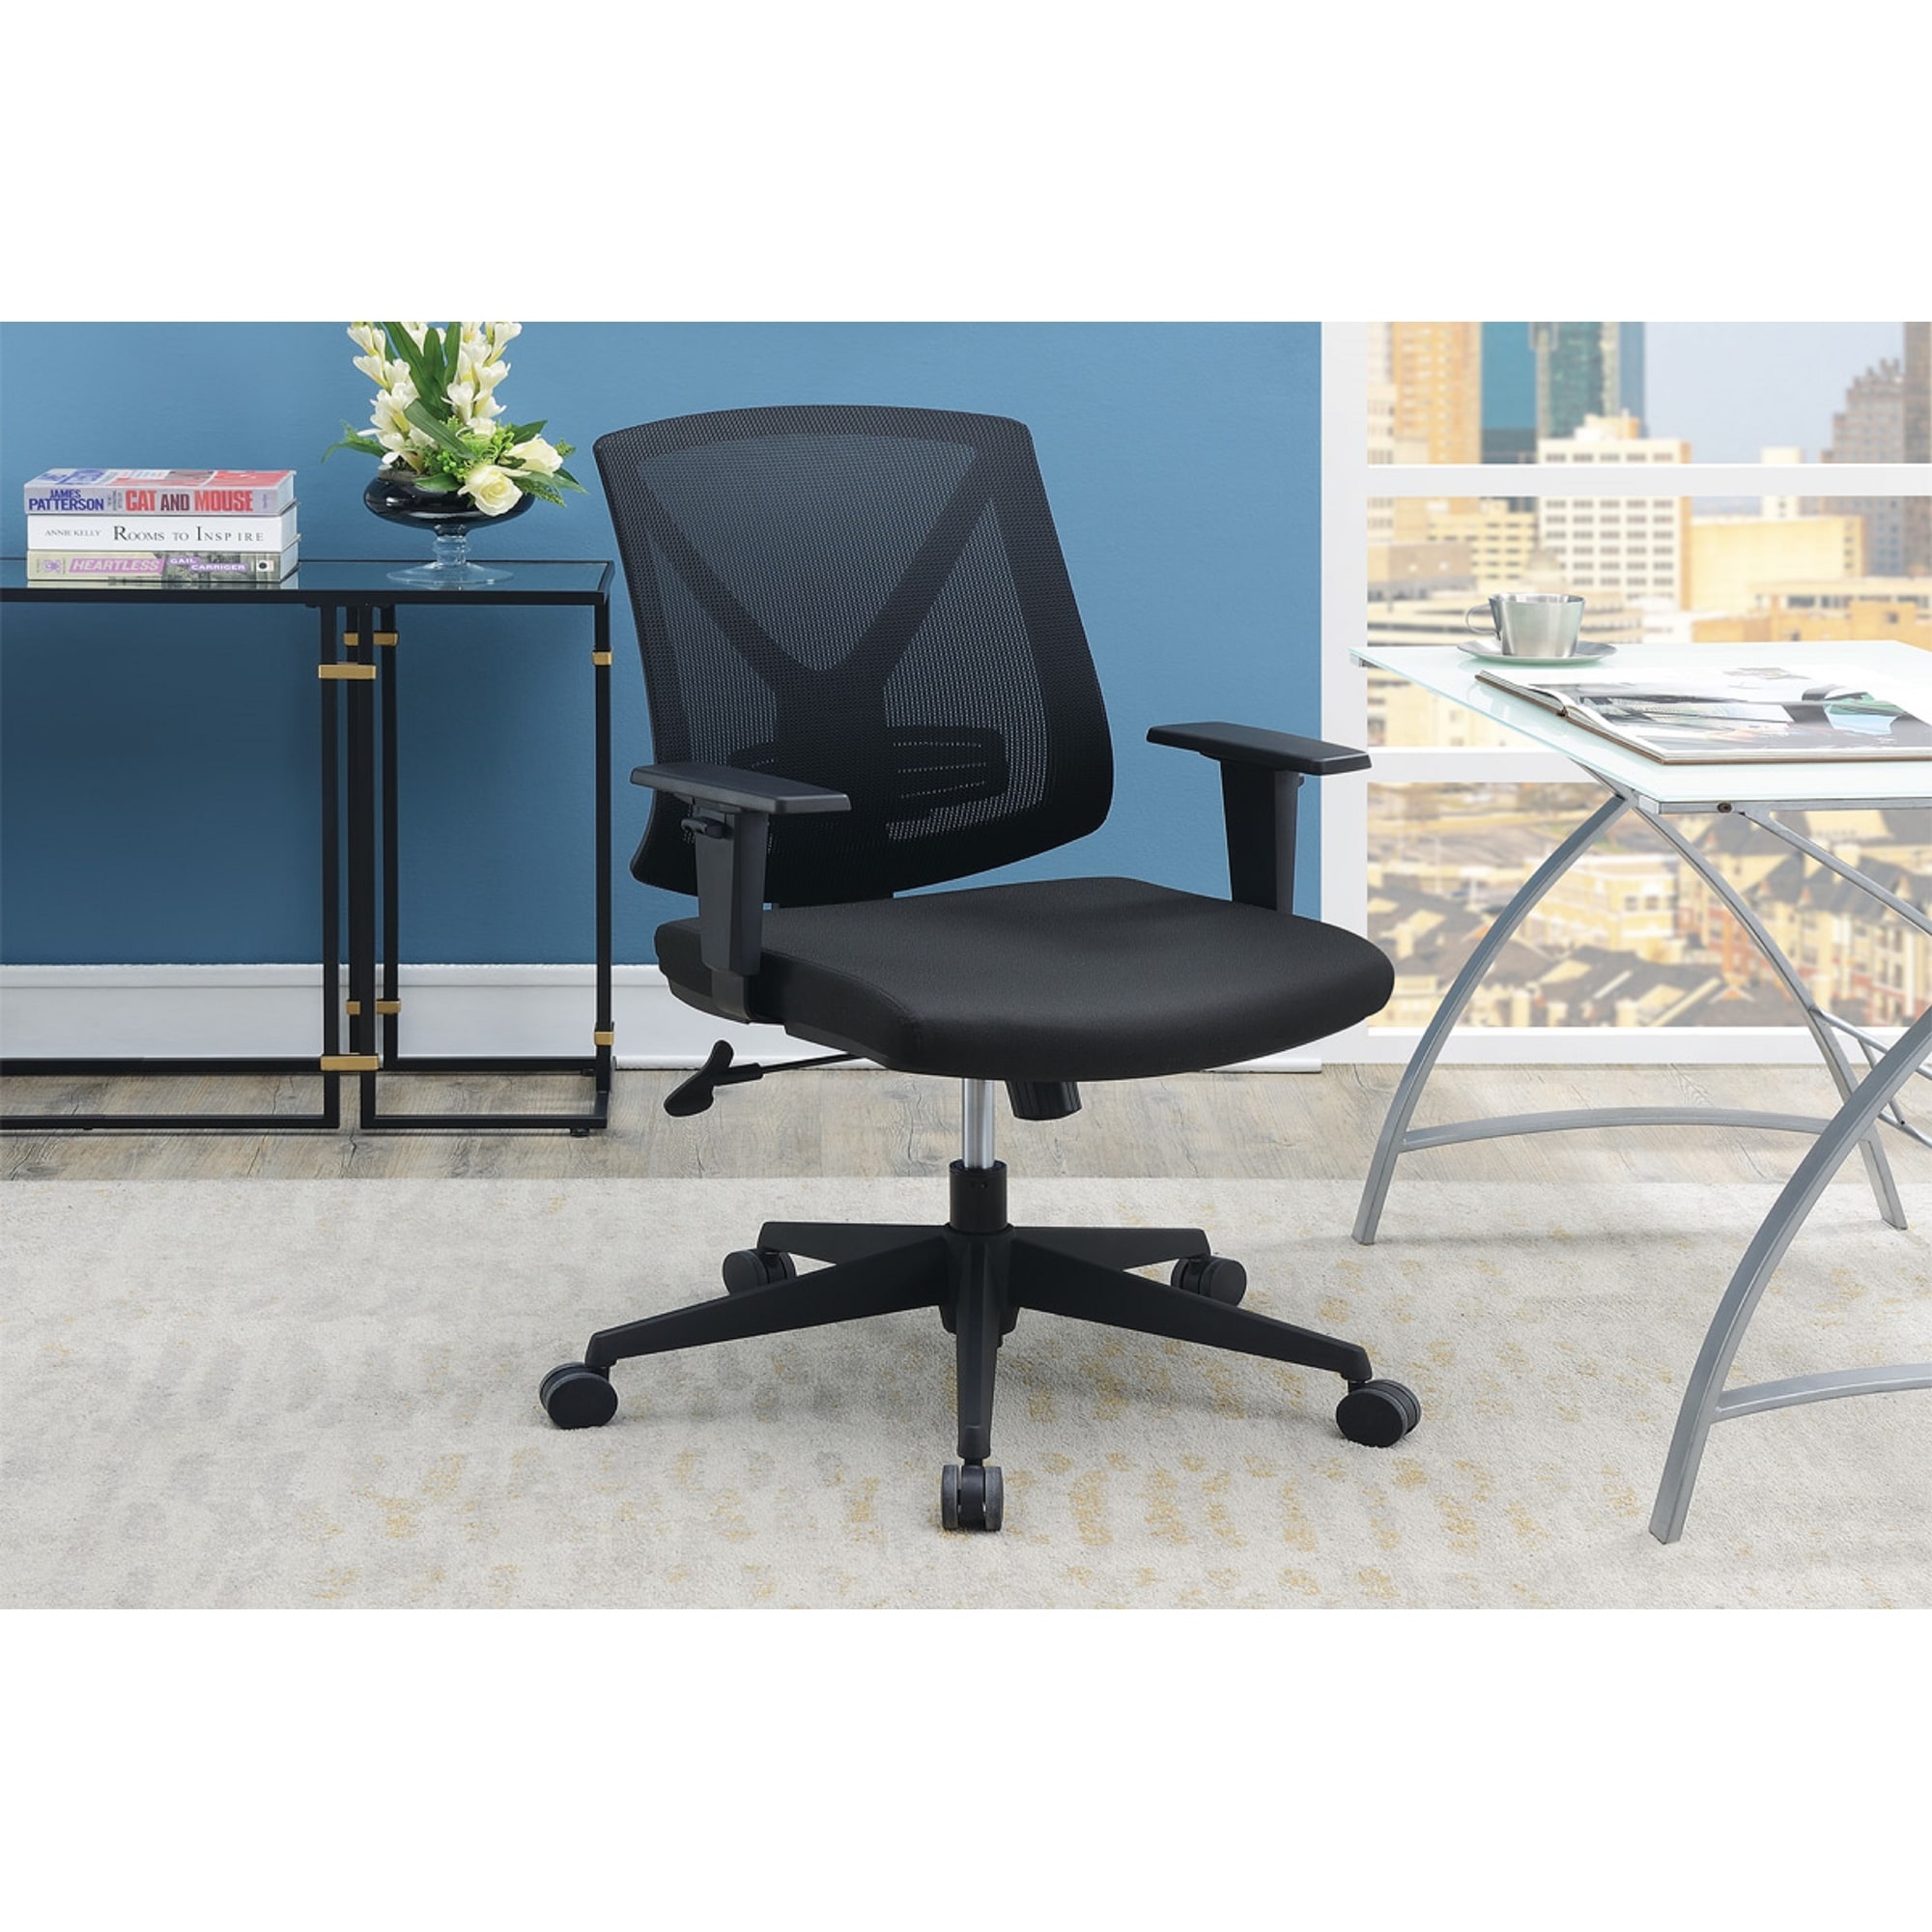 https://ak1.ostkcdn.com/images/products/is/images/direct/3b745840a4e59286108d9dc044ed4ae7c4d26ca9/Modern-1pc-Office-Chair-Black-Color-High-Back-Mesh-Desk-Chair-Relax-Enjoy-Working.jpg